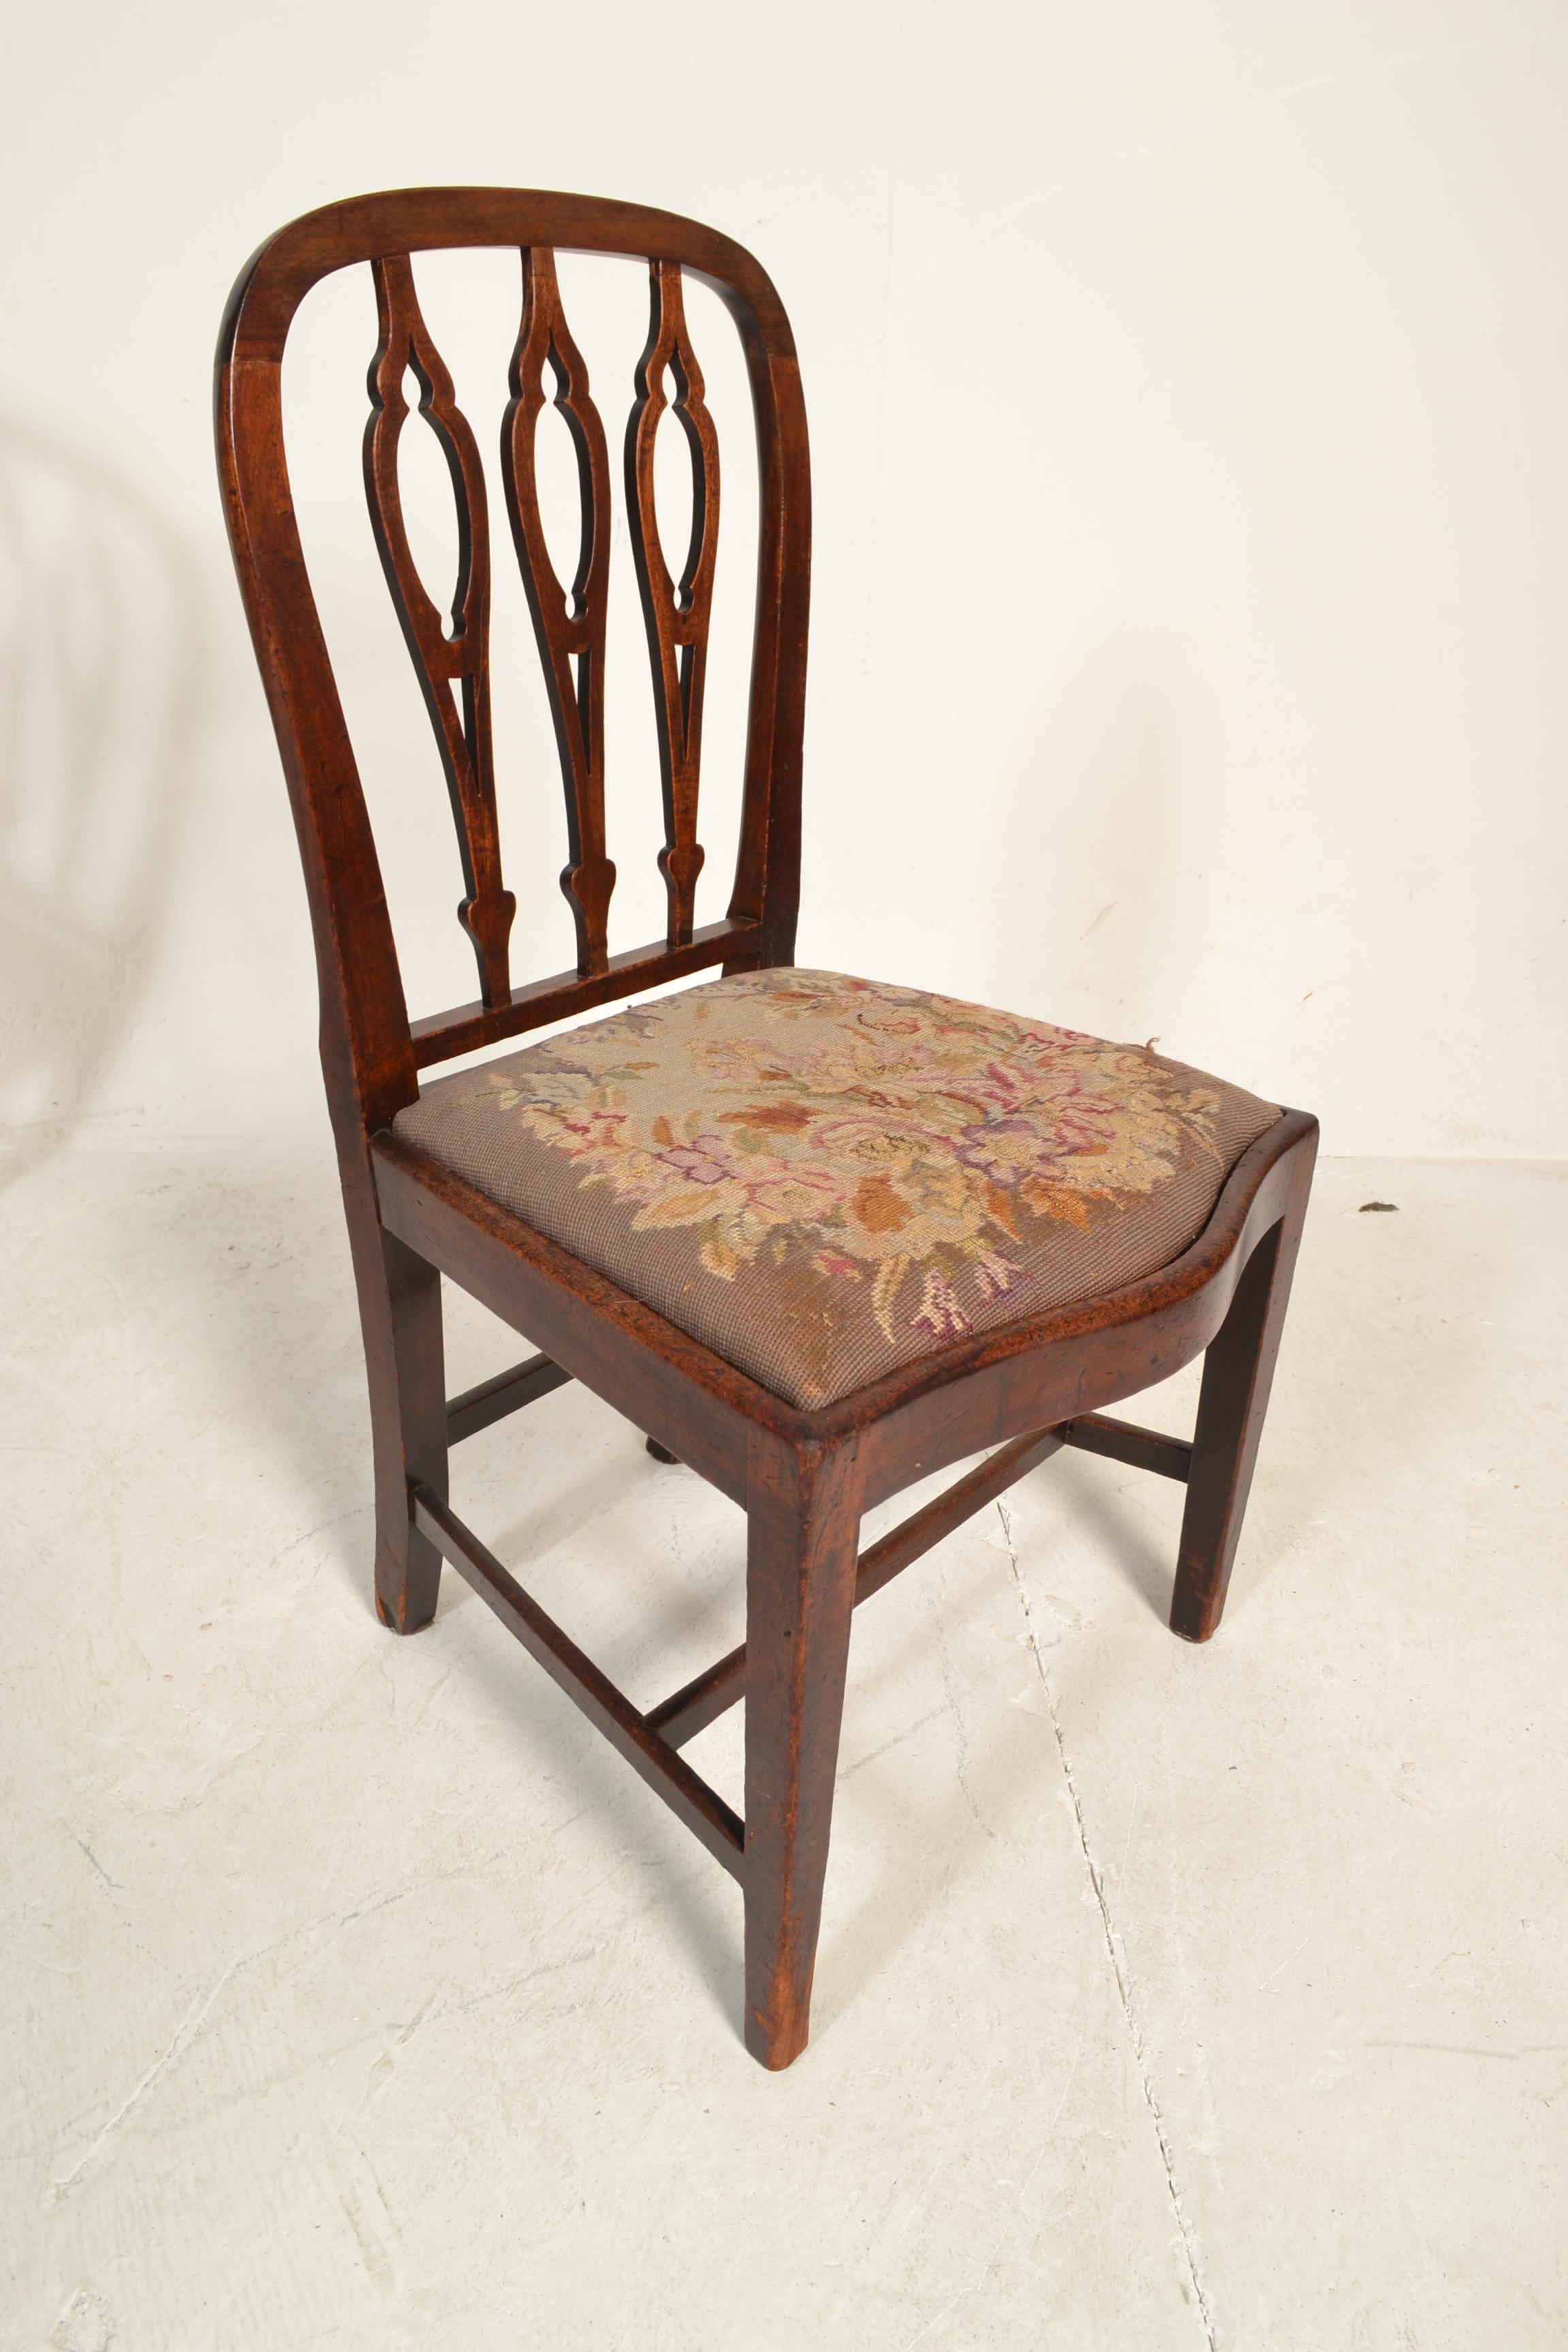 SET OF 6 19TH CENTURY GEORGE III MAHOGANY DINING CHAIRS - Image 17 of 32